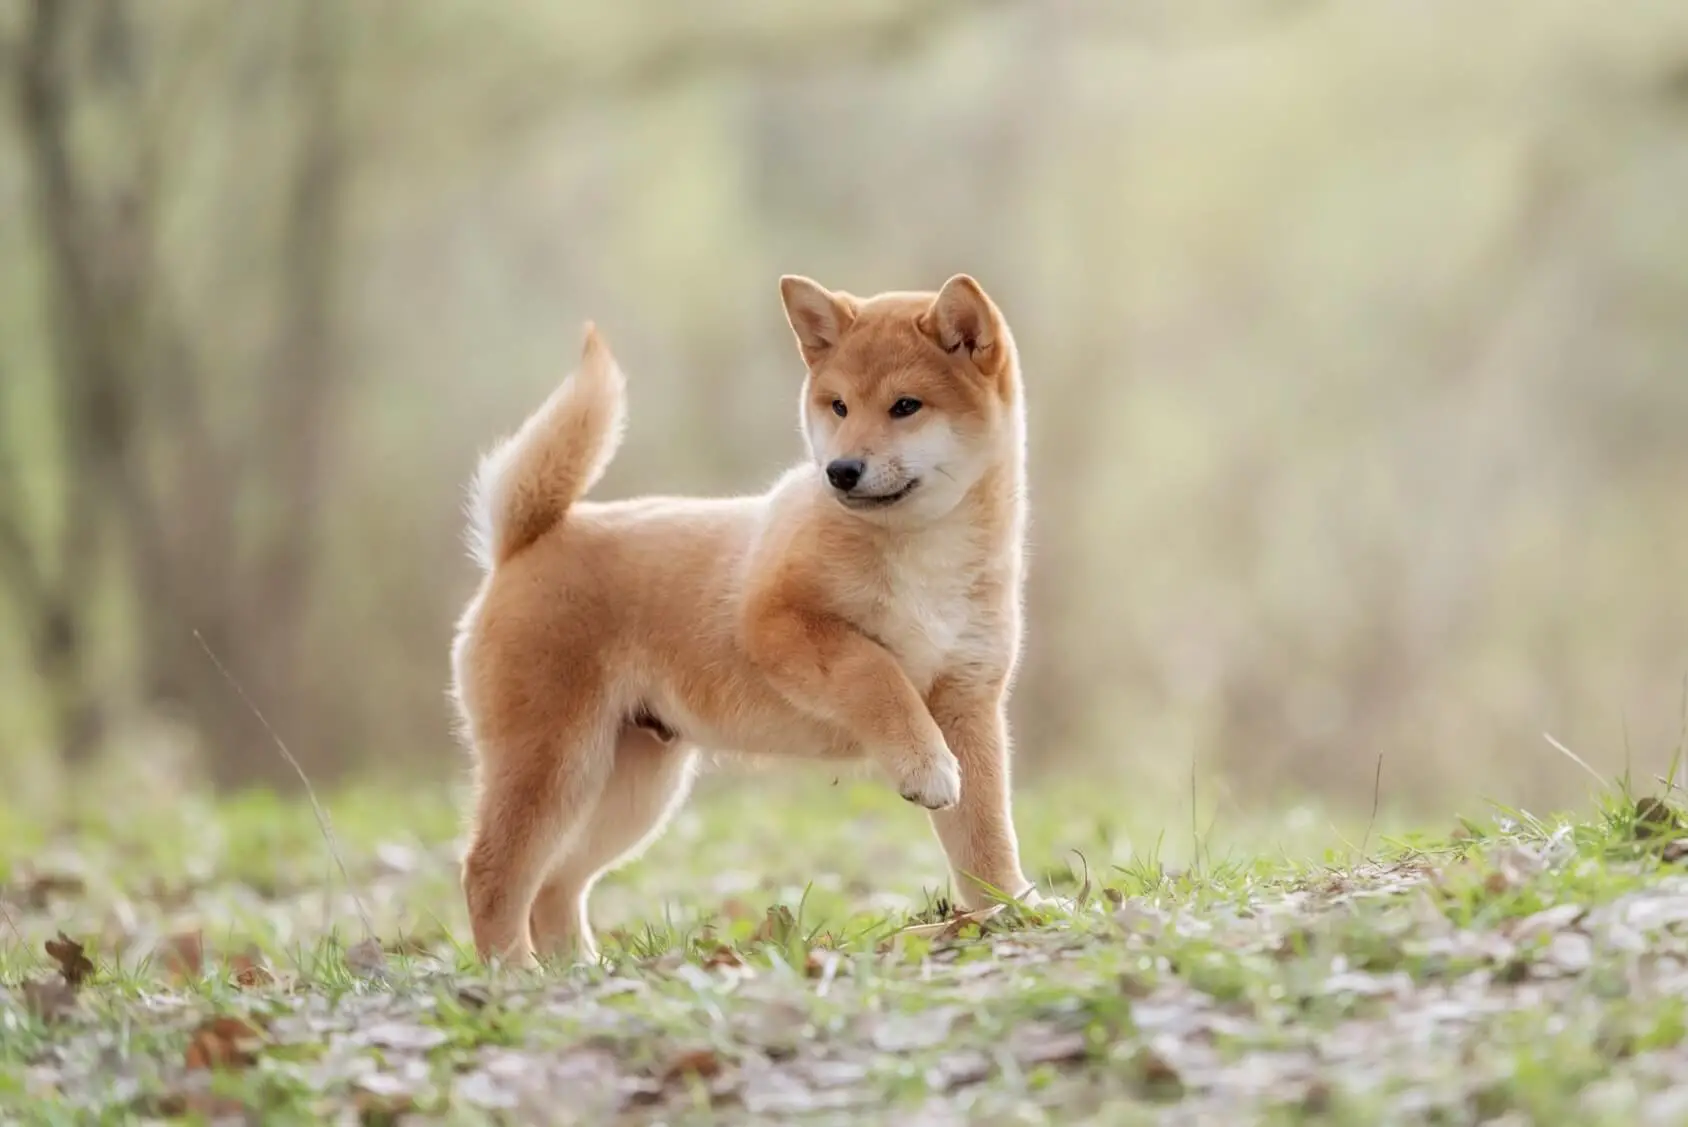 [11+] 5 Months Old Premium Shiba Inu Dog Puppy For Sale Or Adoption
Near Me